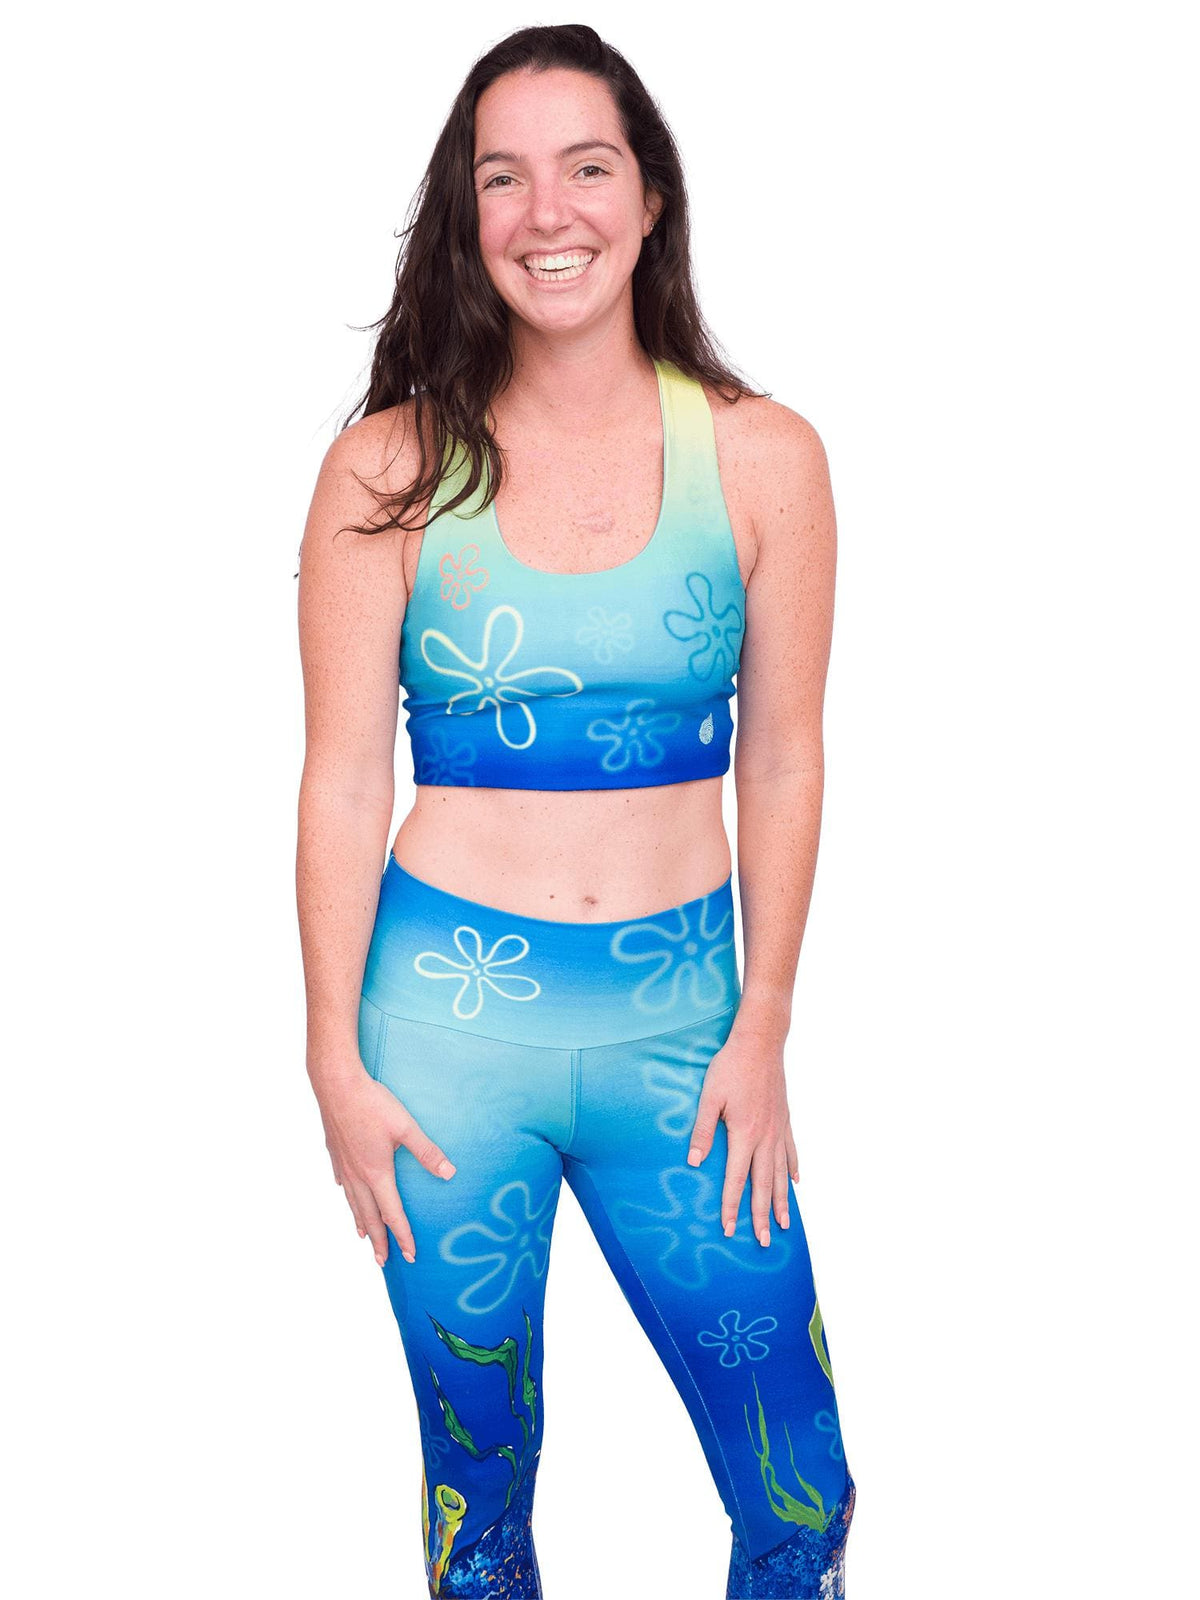 Model: Maddie is the Program &amp; Outreach Director at Debris Free Oceans and a restoration ecology educator. She is 5’8”, 135lbs, and wearing a size M legging and top.